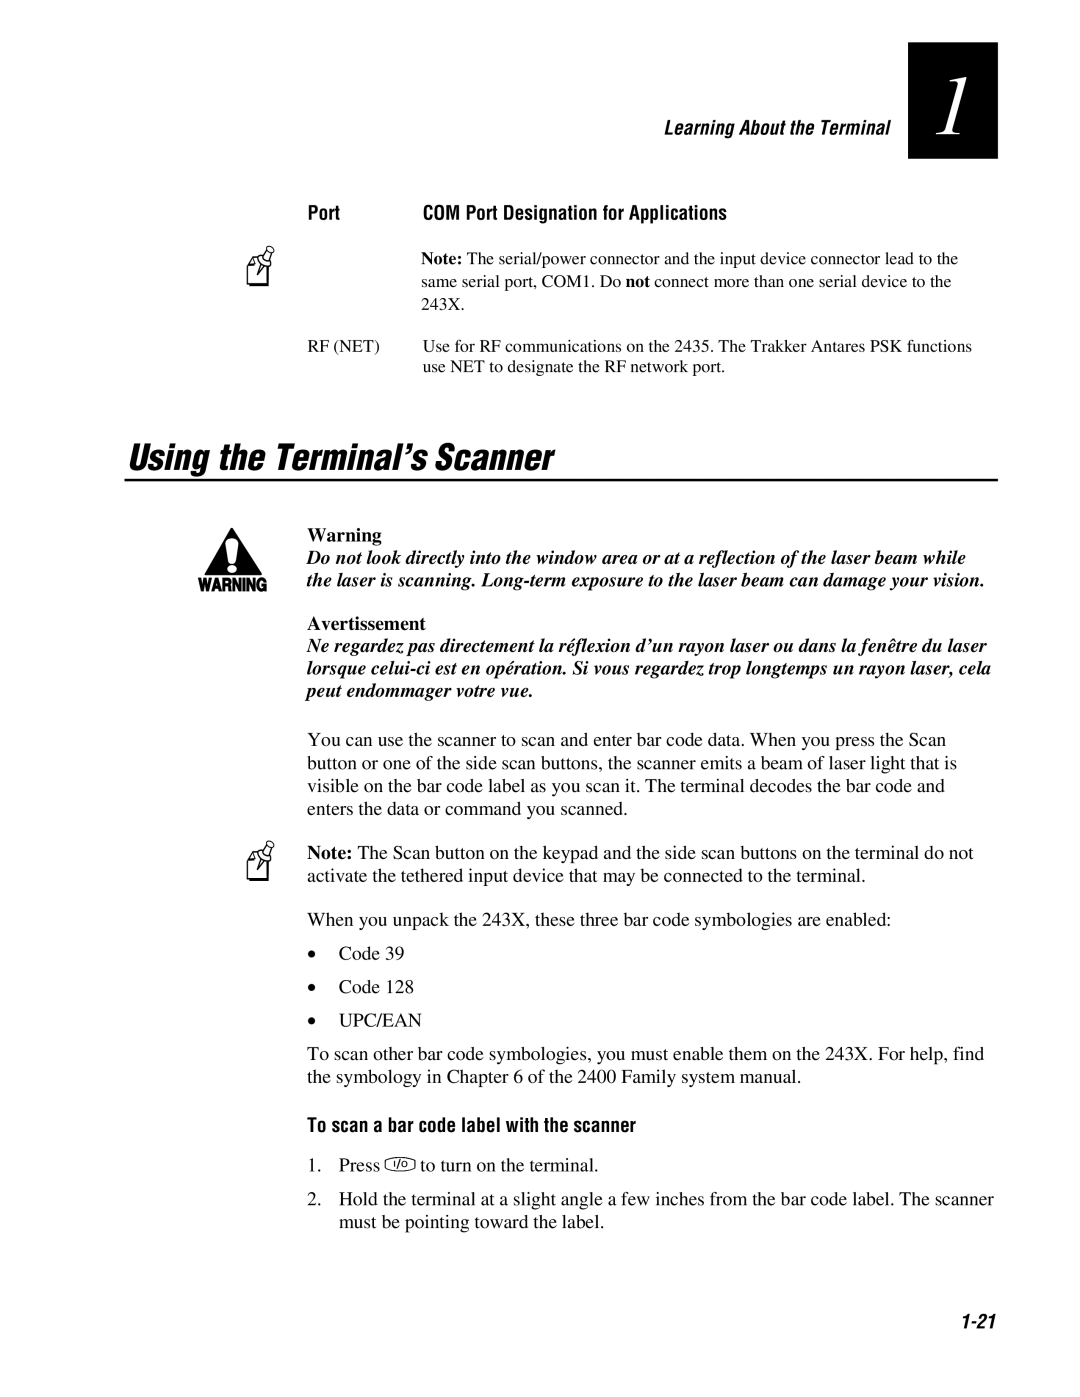 IBM 243X user manual Using the Terminal’s Scanner, To scan a bar code label with the scanner, 1-21, Port, Avertissement 